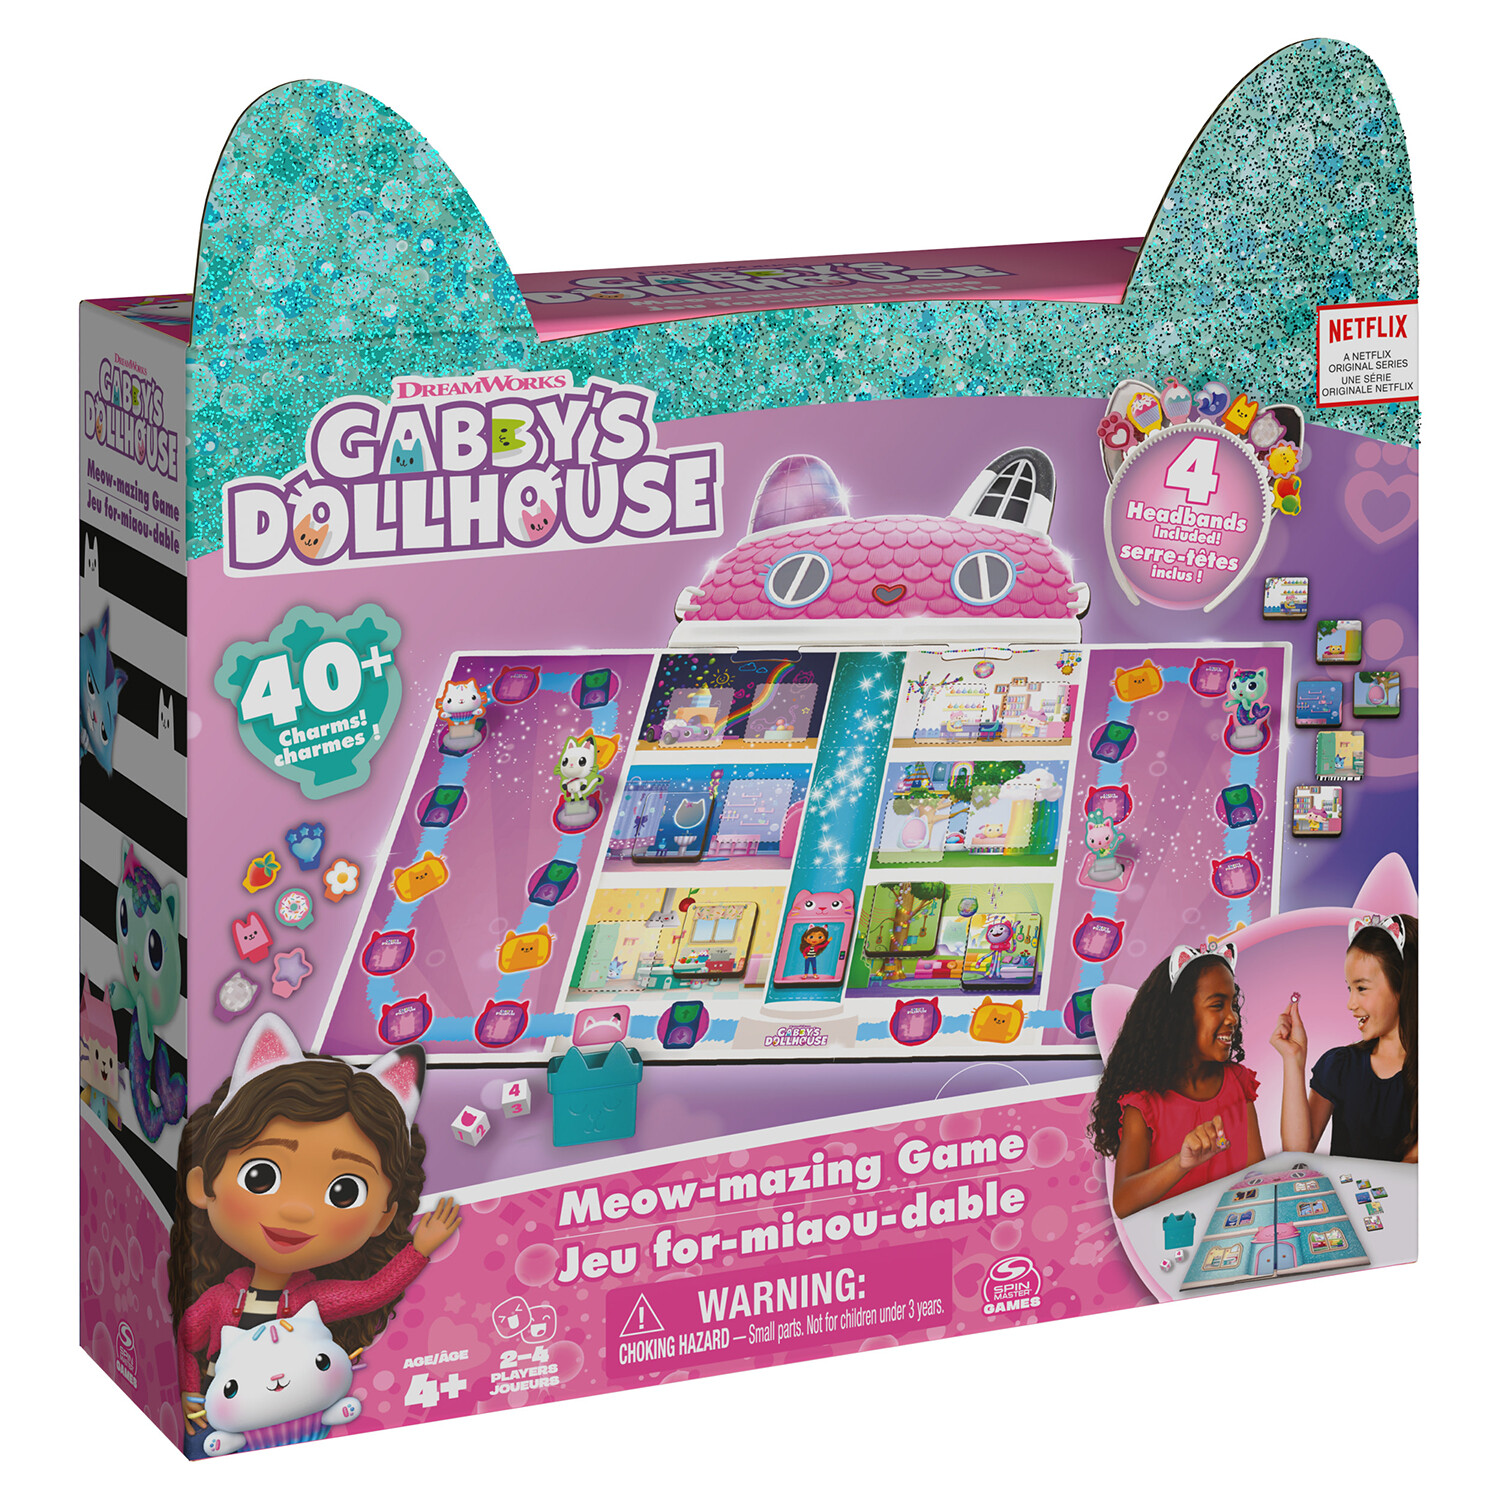 Dreamworks Gabby's Dollhouse Meow Mazing Game Playset Image 2